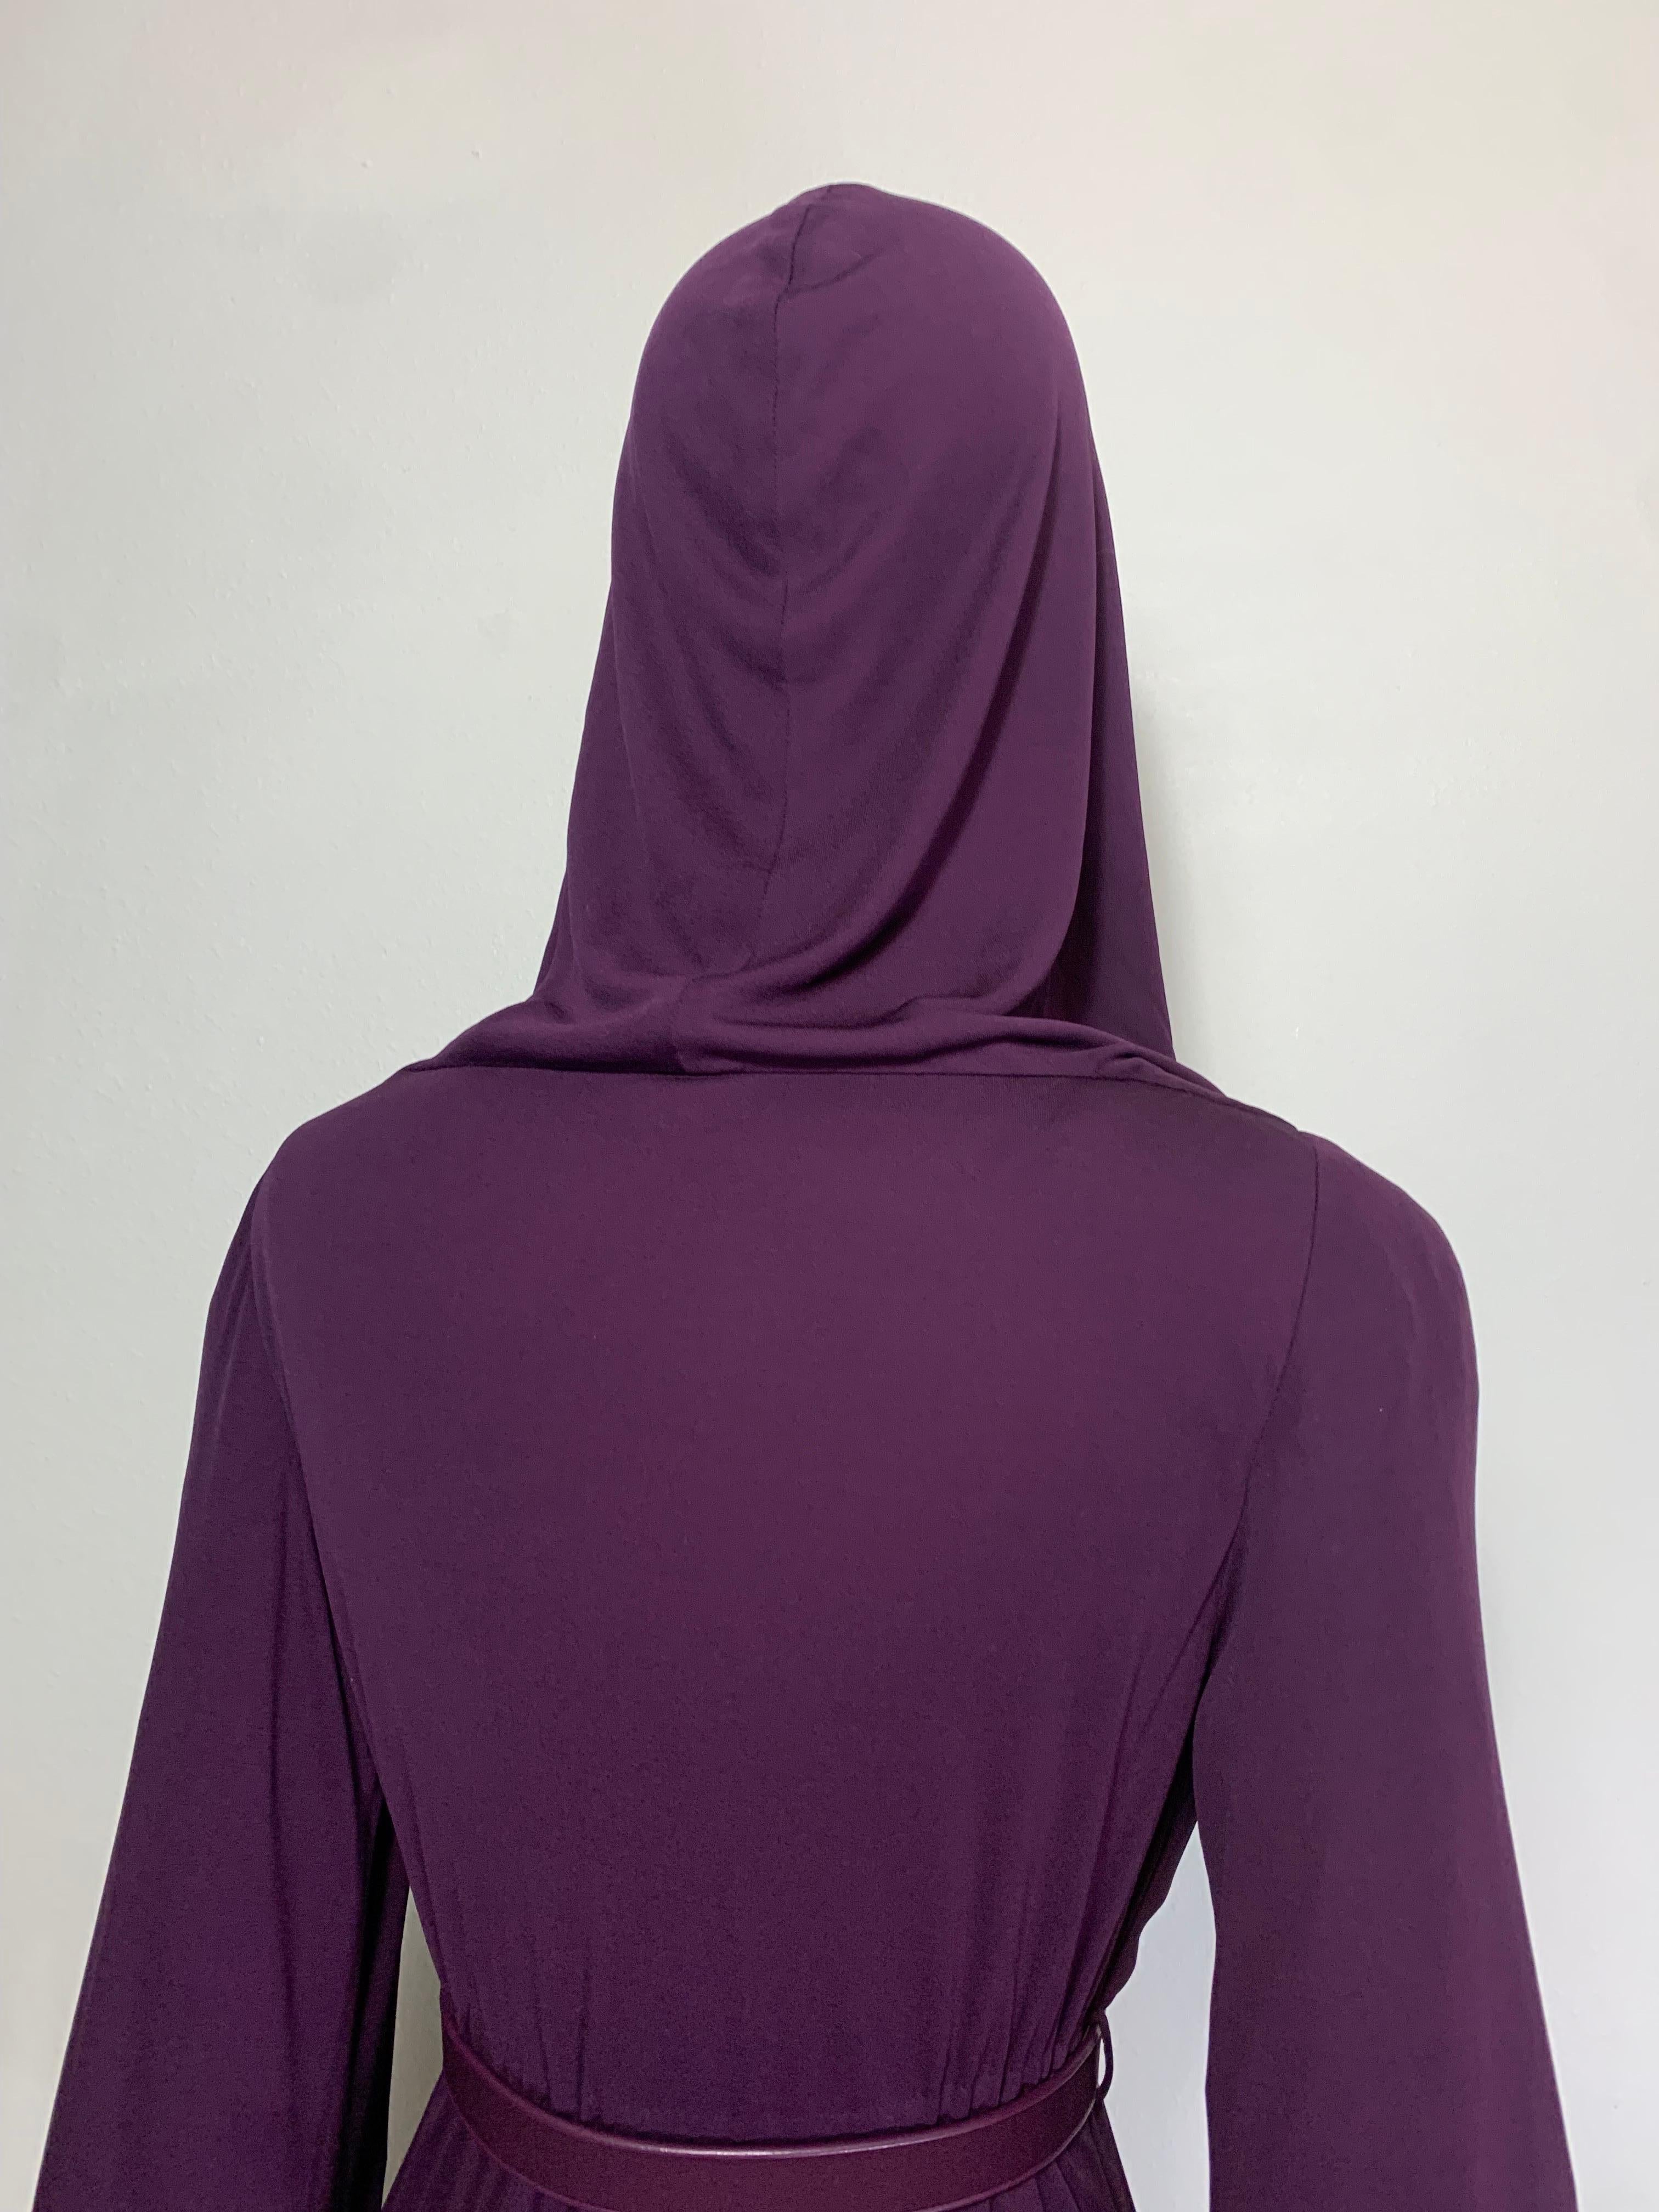 1975 James Galanos Dramatic Aubergine Jersey Maxi Gown w Fabulous Draped Hood For Sale 6